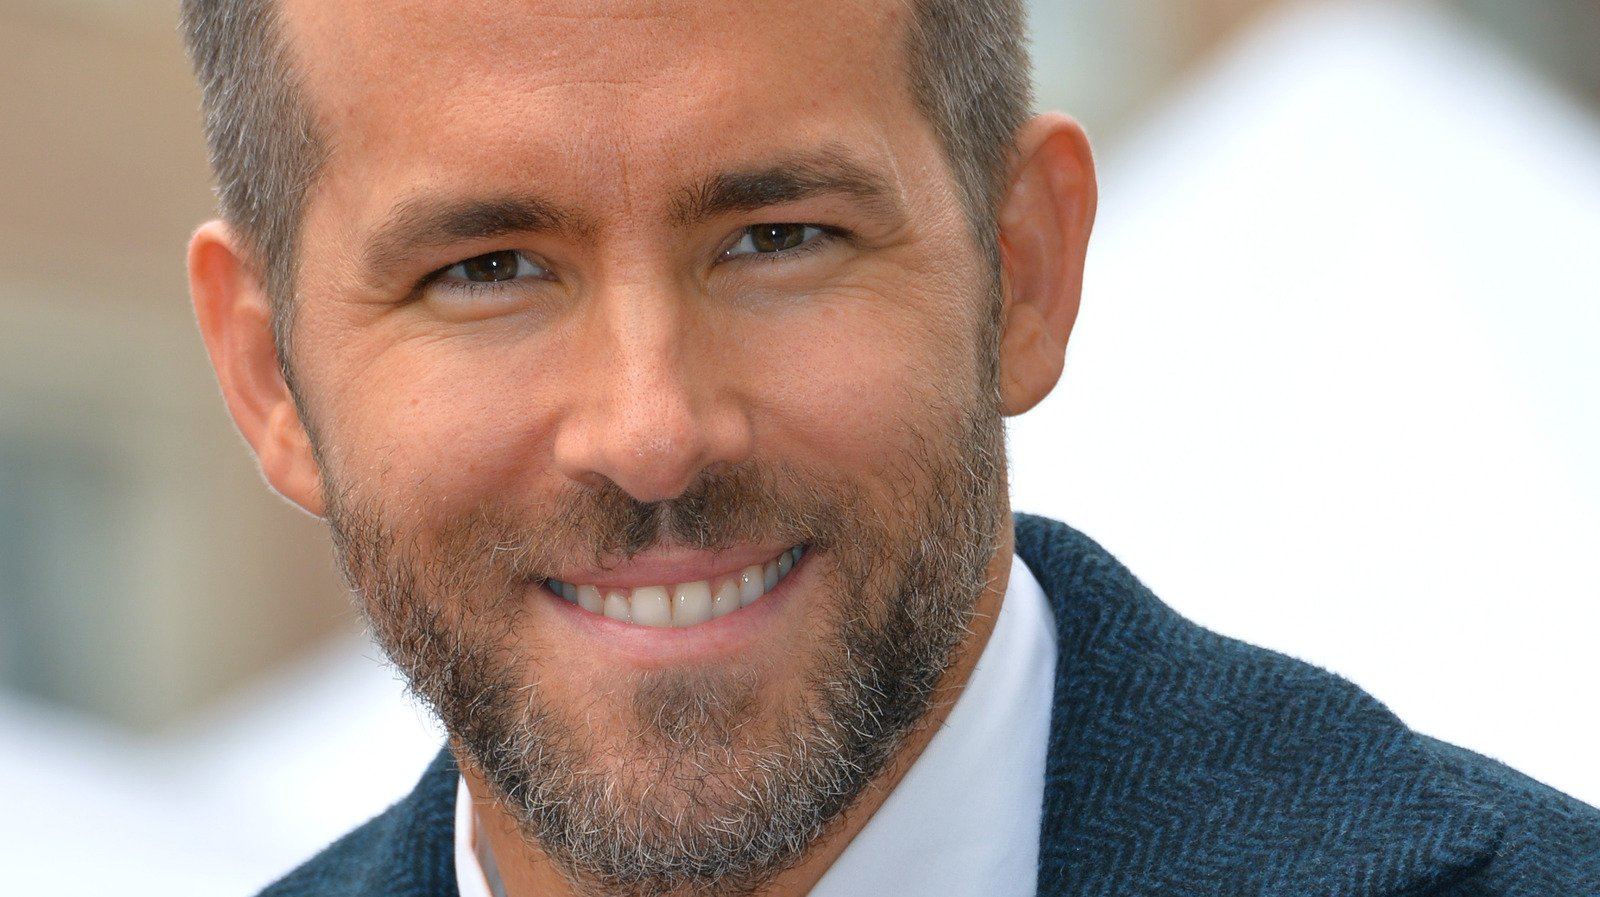 Ryan Reynolds Is Taking a Break from Work to Spend Time with Family